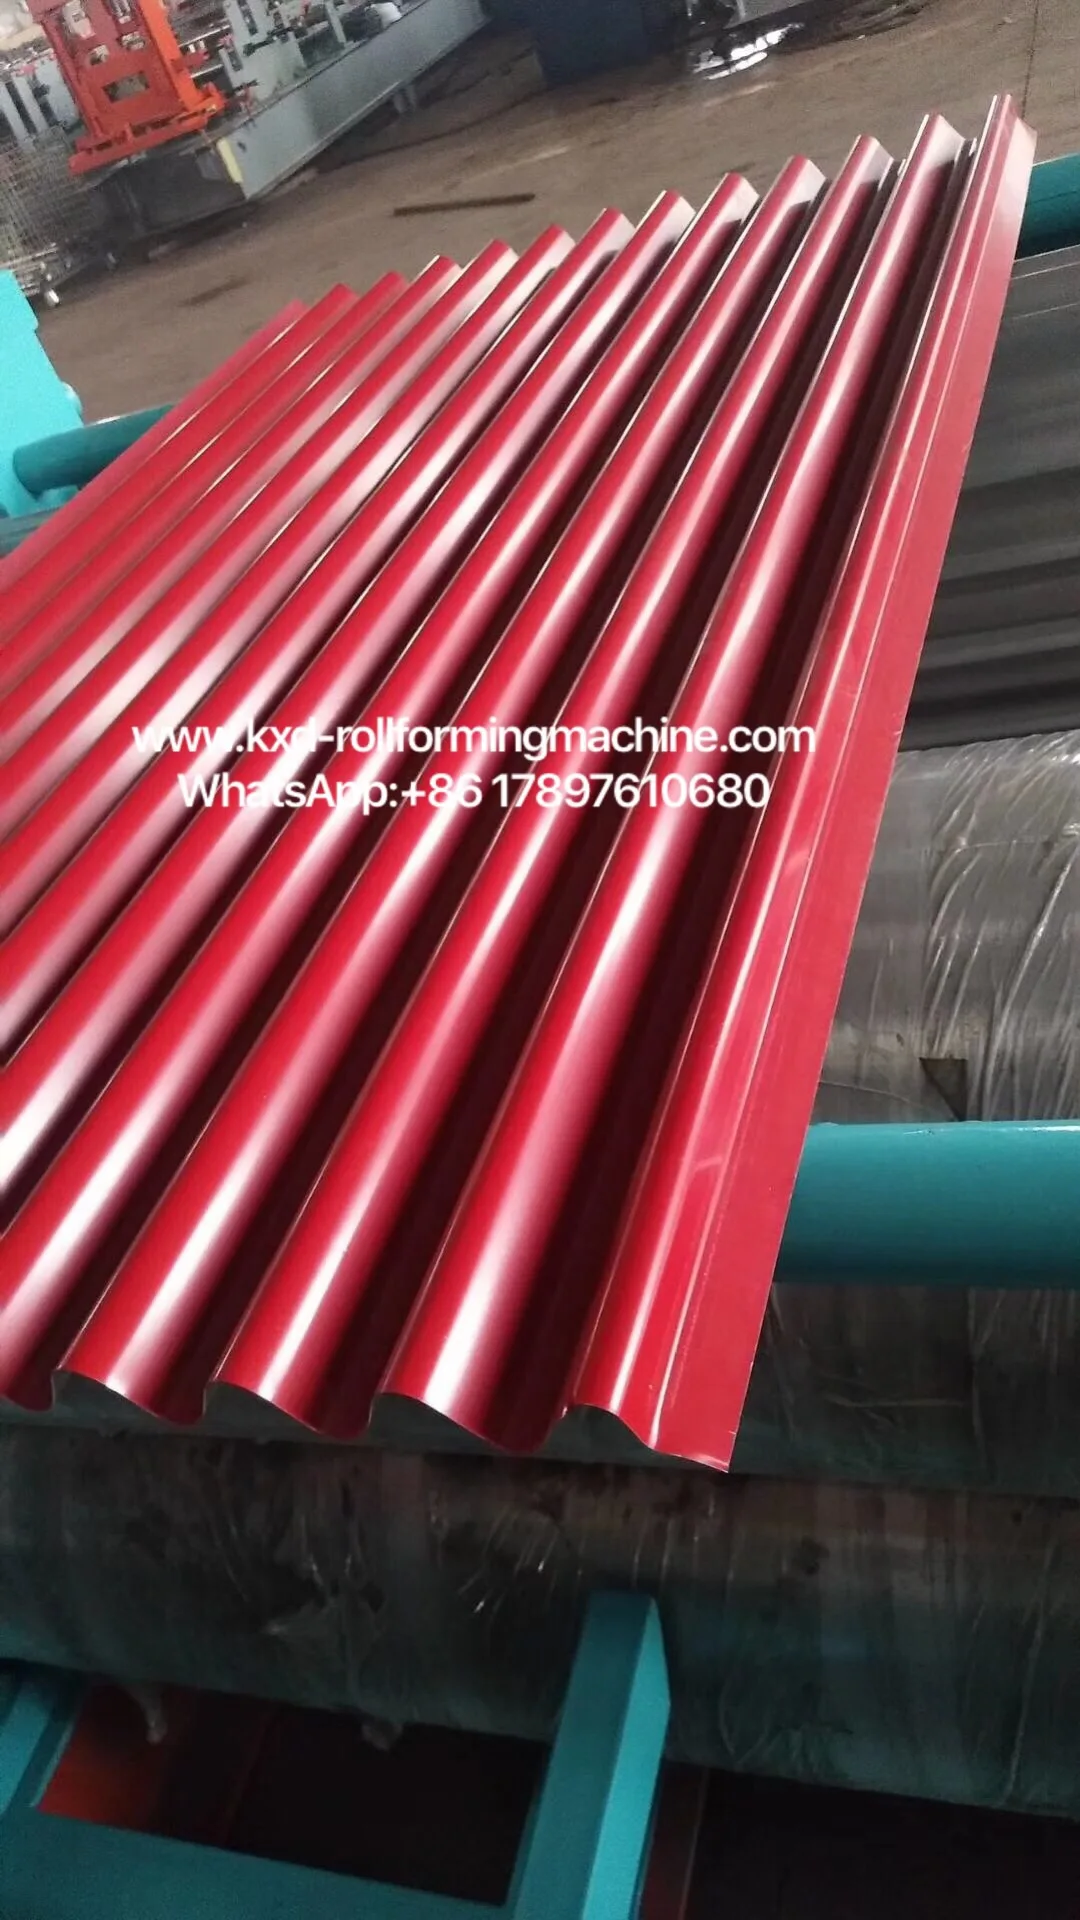 CORRUGATED TILE ROLL FORMING MACHINE